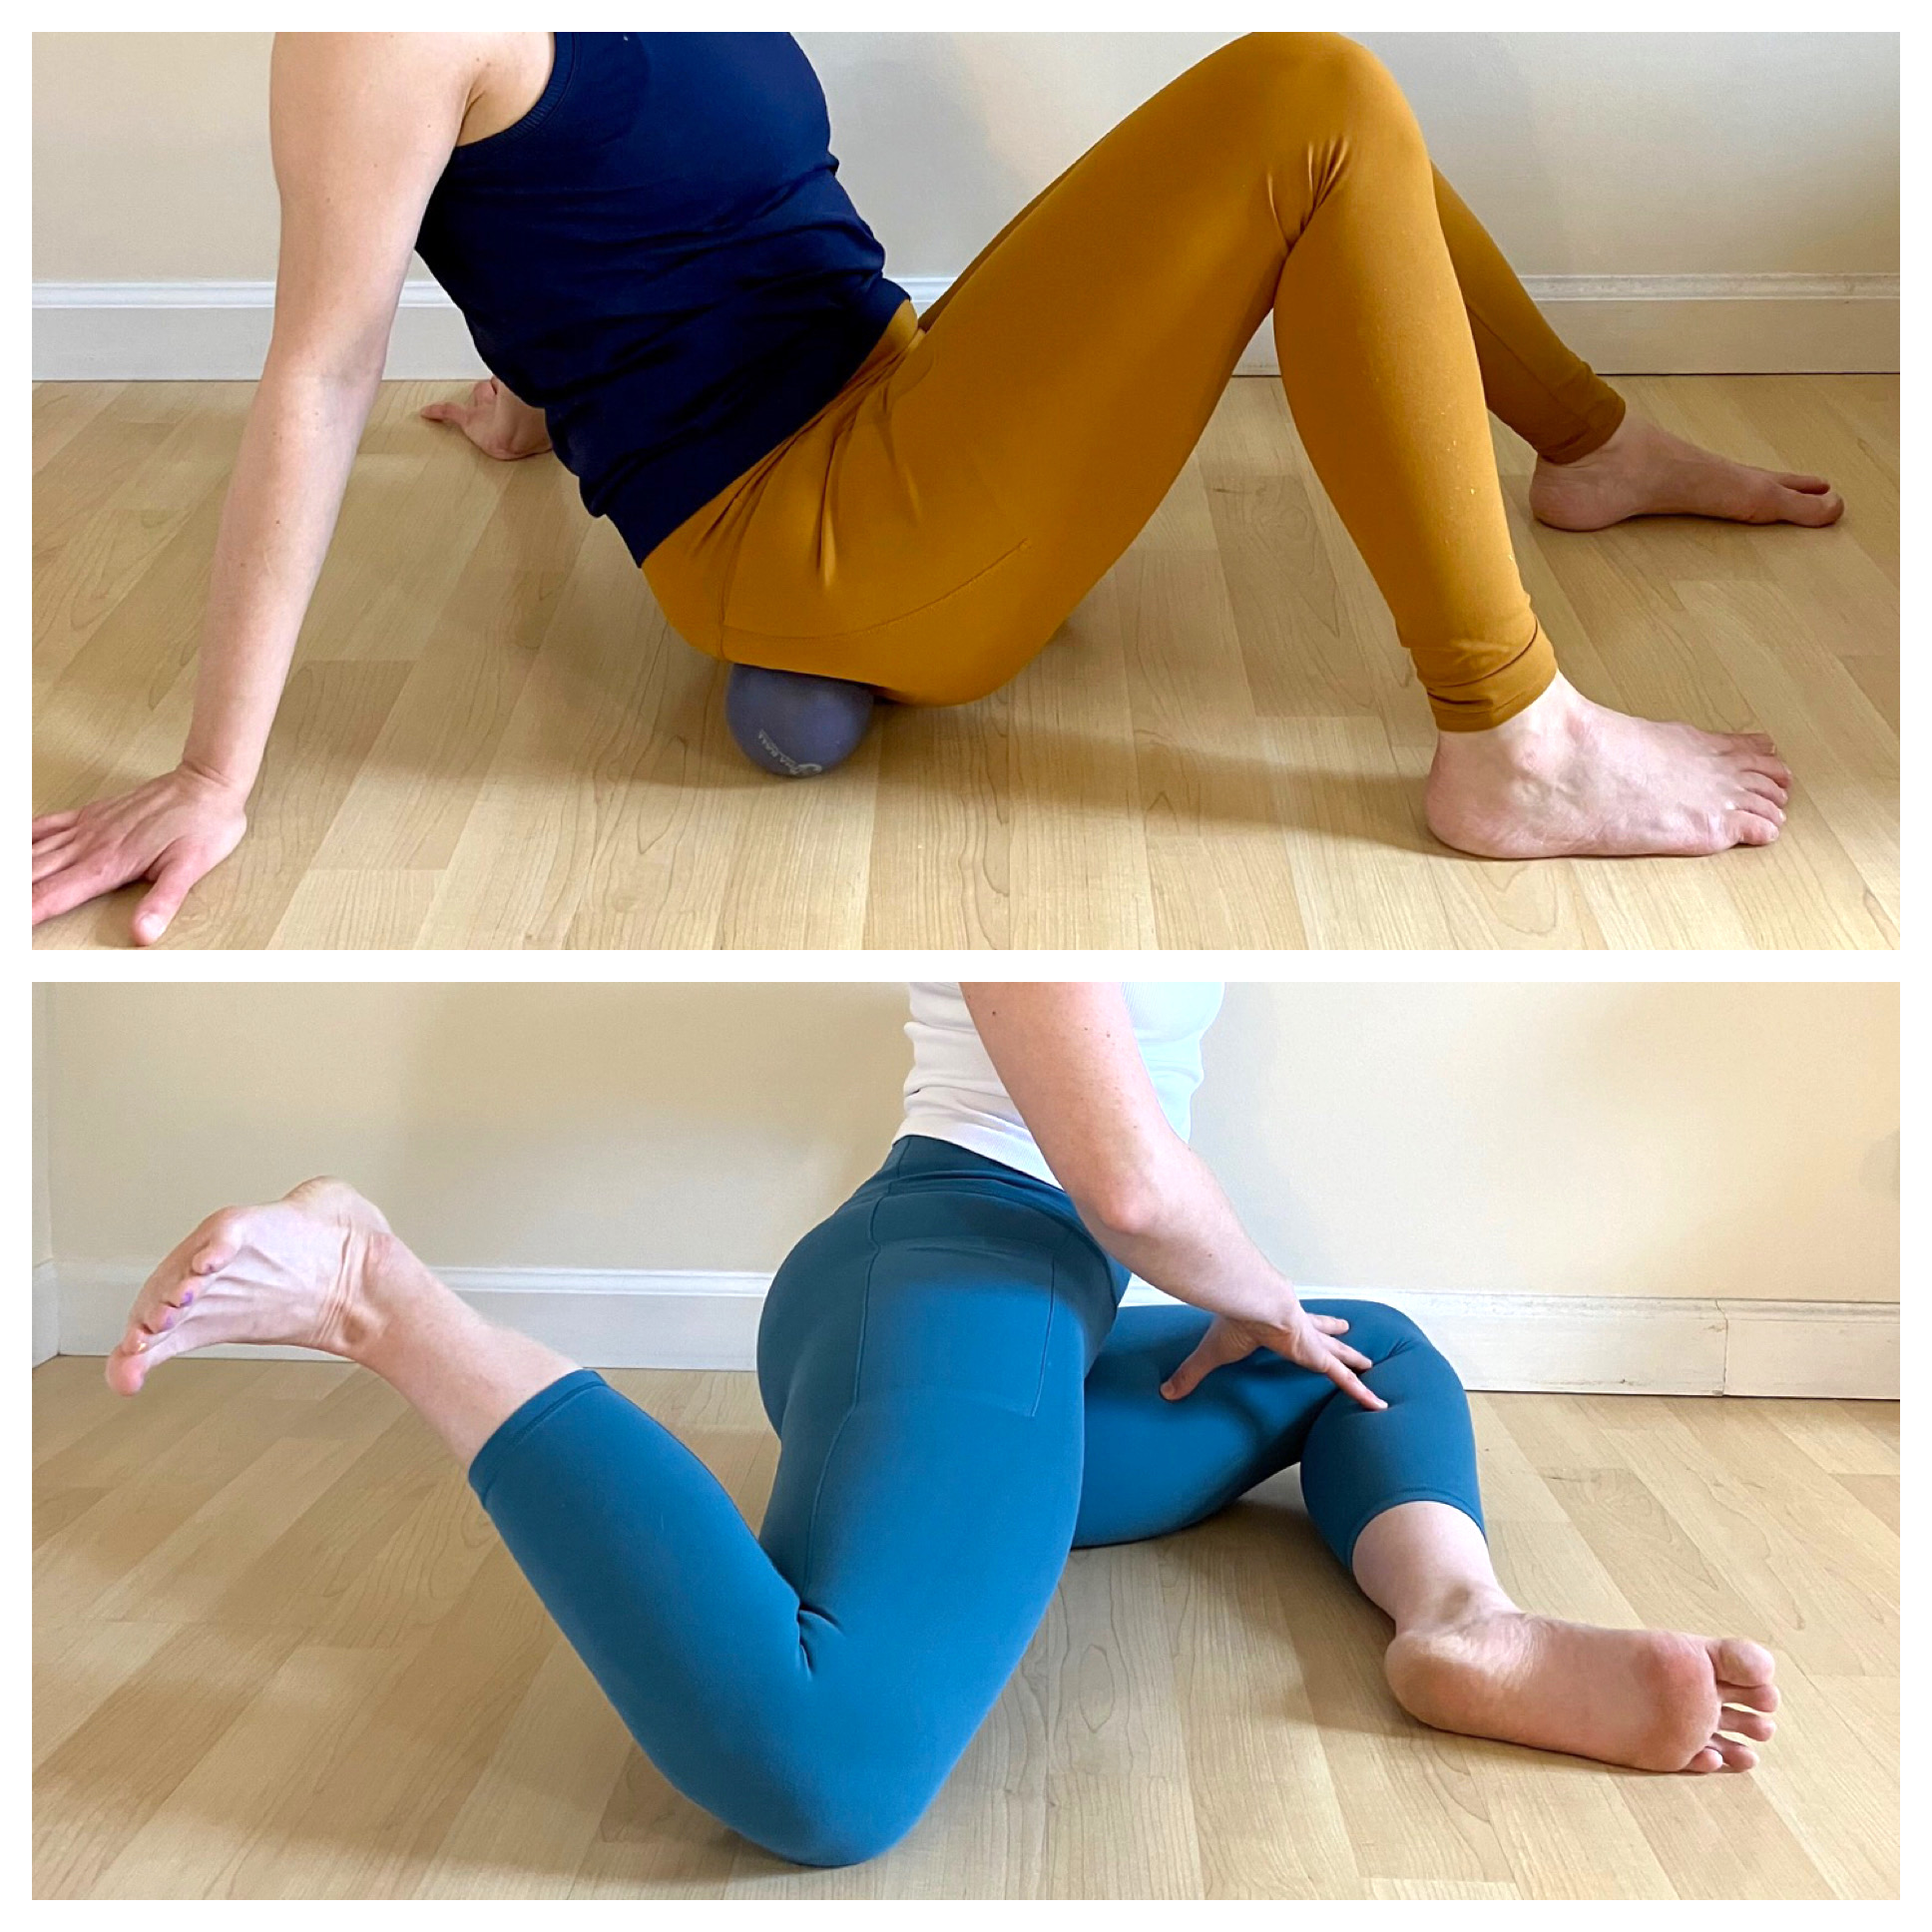 two bodies demonstrating rolling and mobility techniques for the pelvis